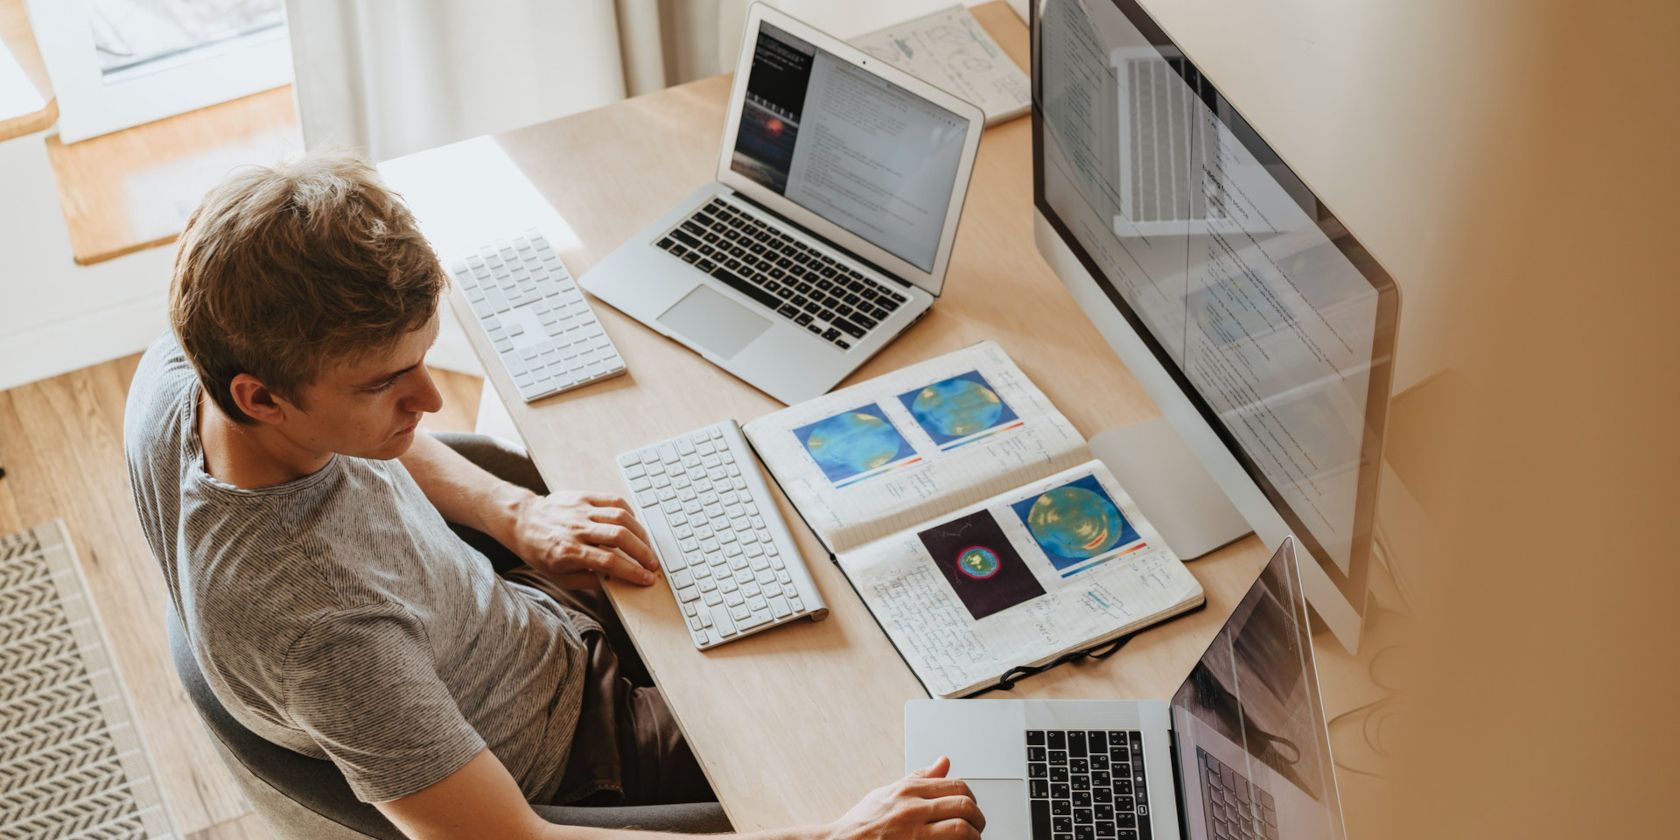 Remote Work image depicting man working on multiple computer systems processing geological data